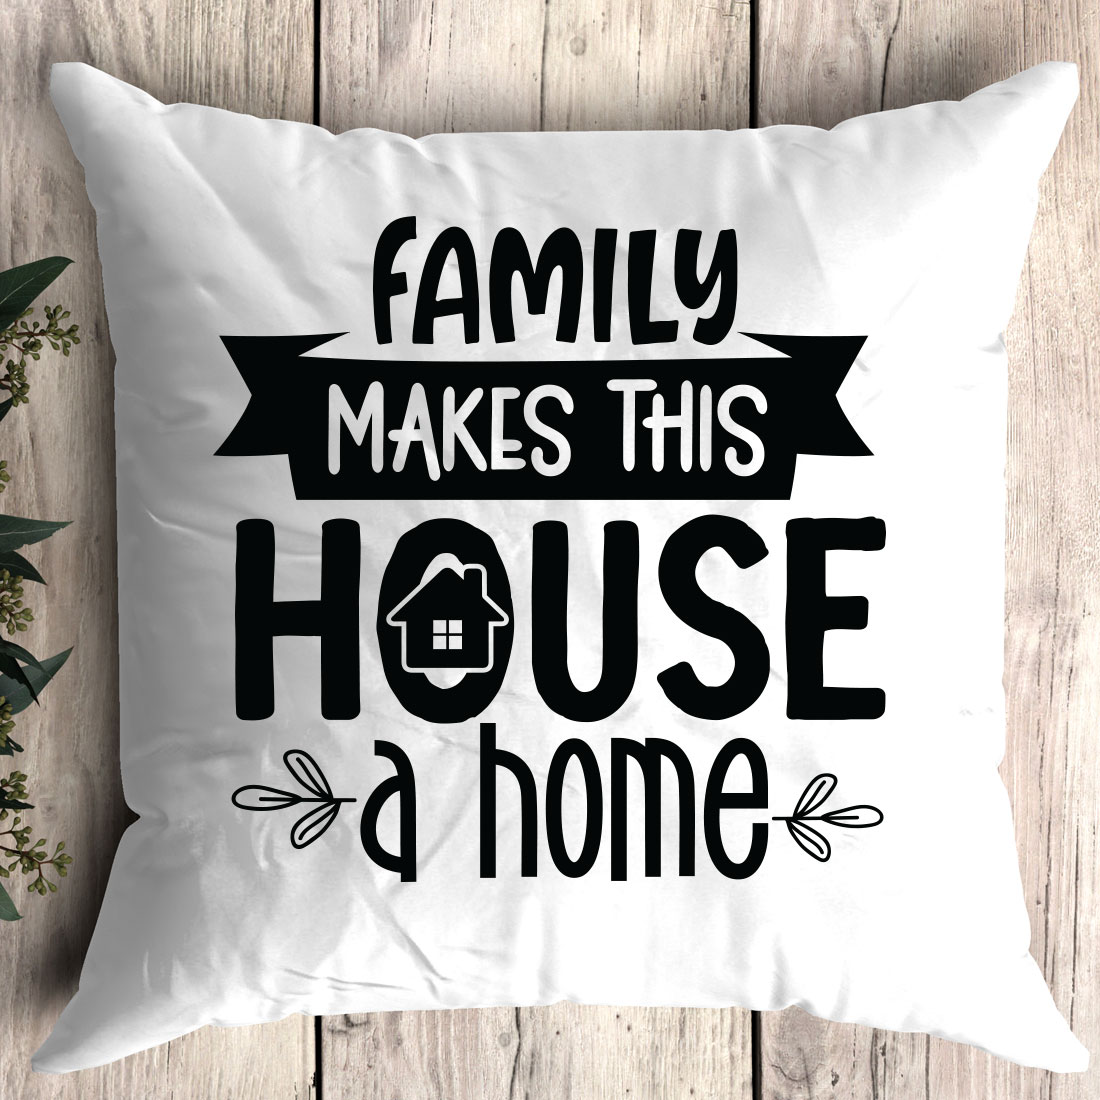 Pillow that says family makes this house a home.